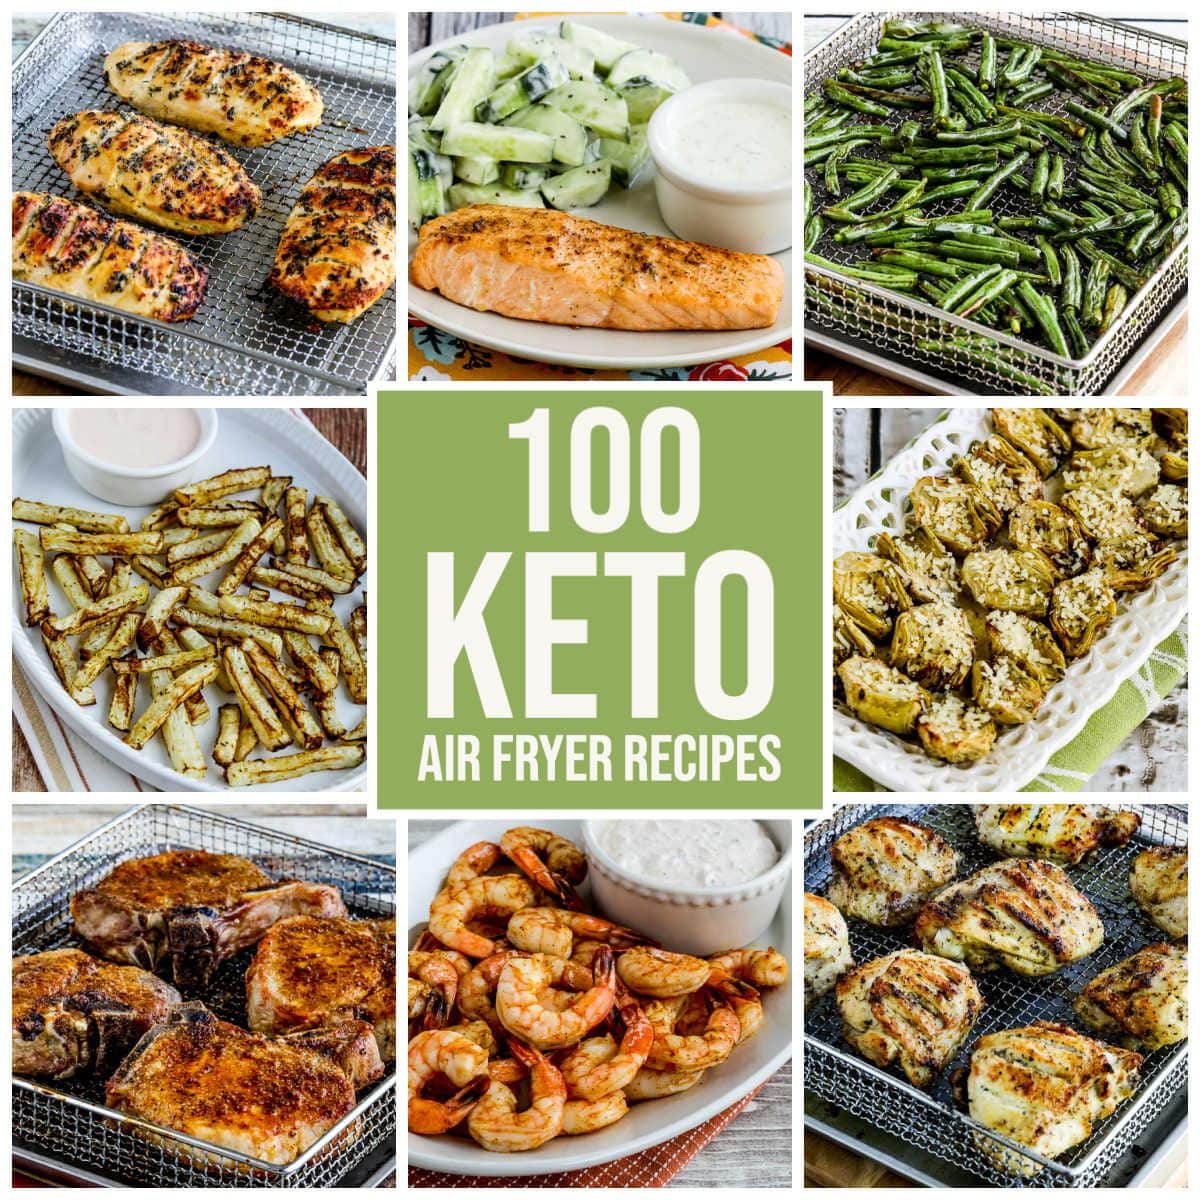 100 Keto Air Fryer Recipes collage of featured recipes